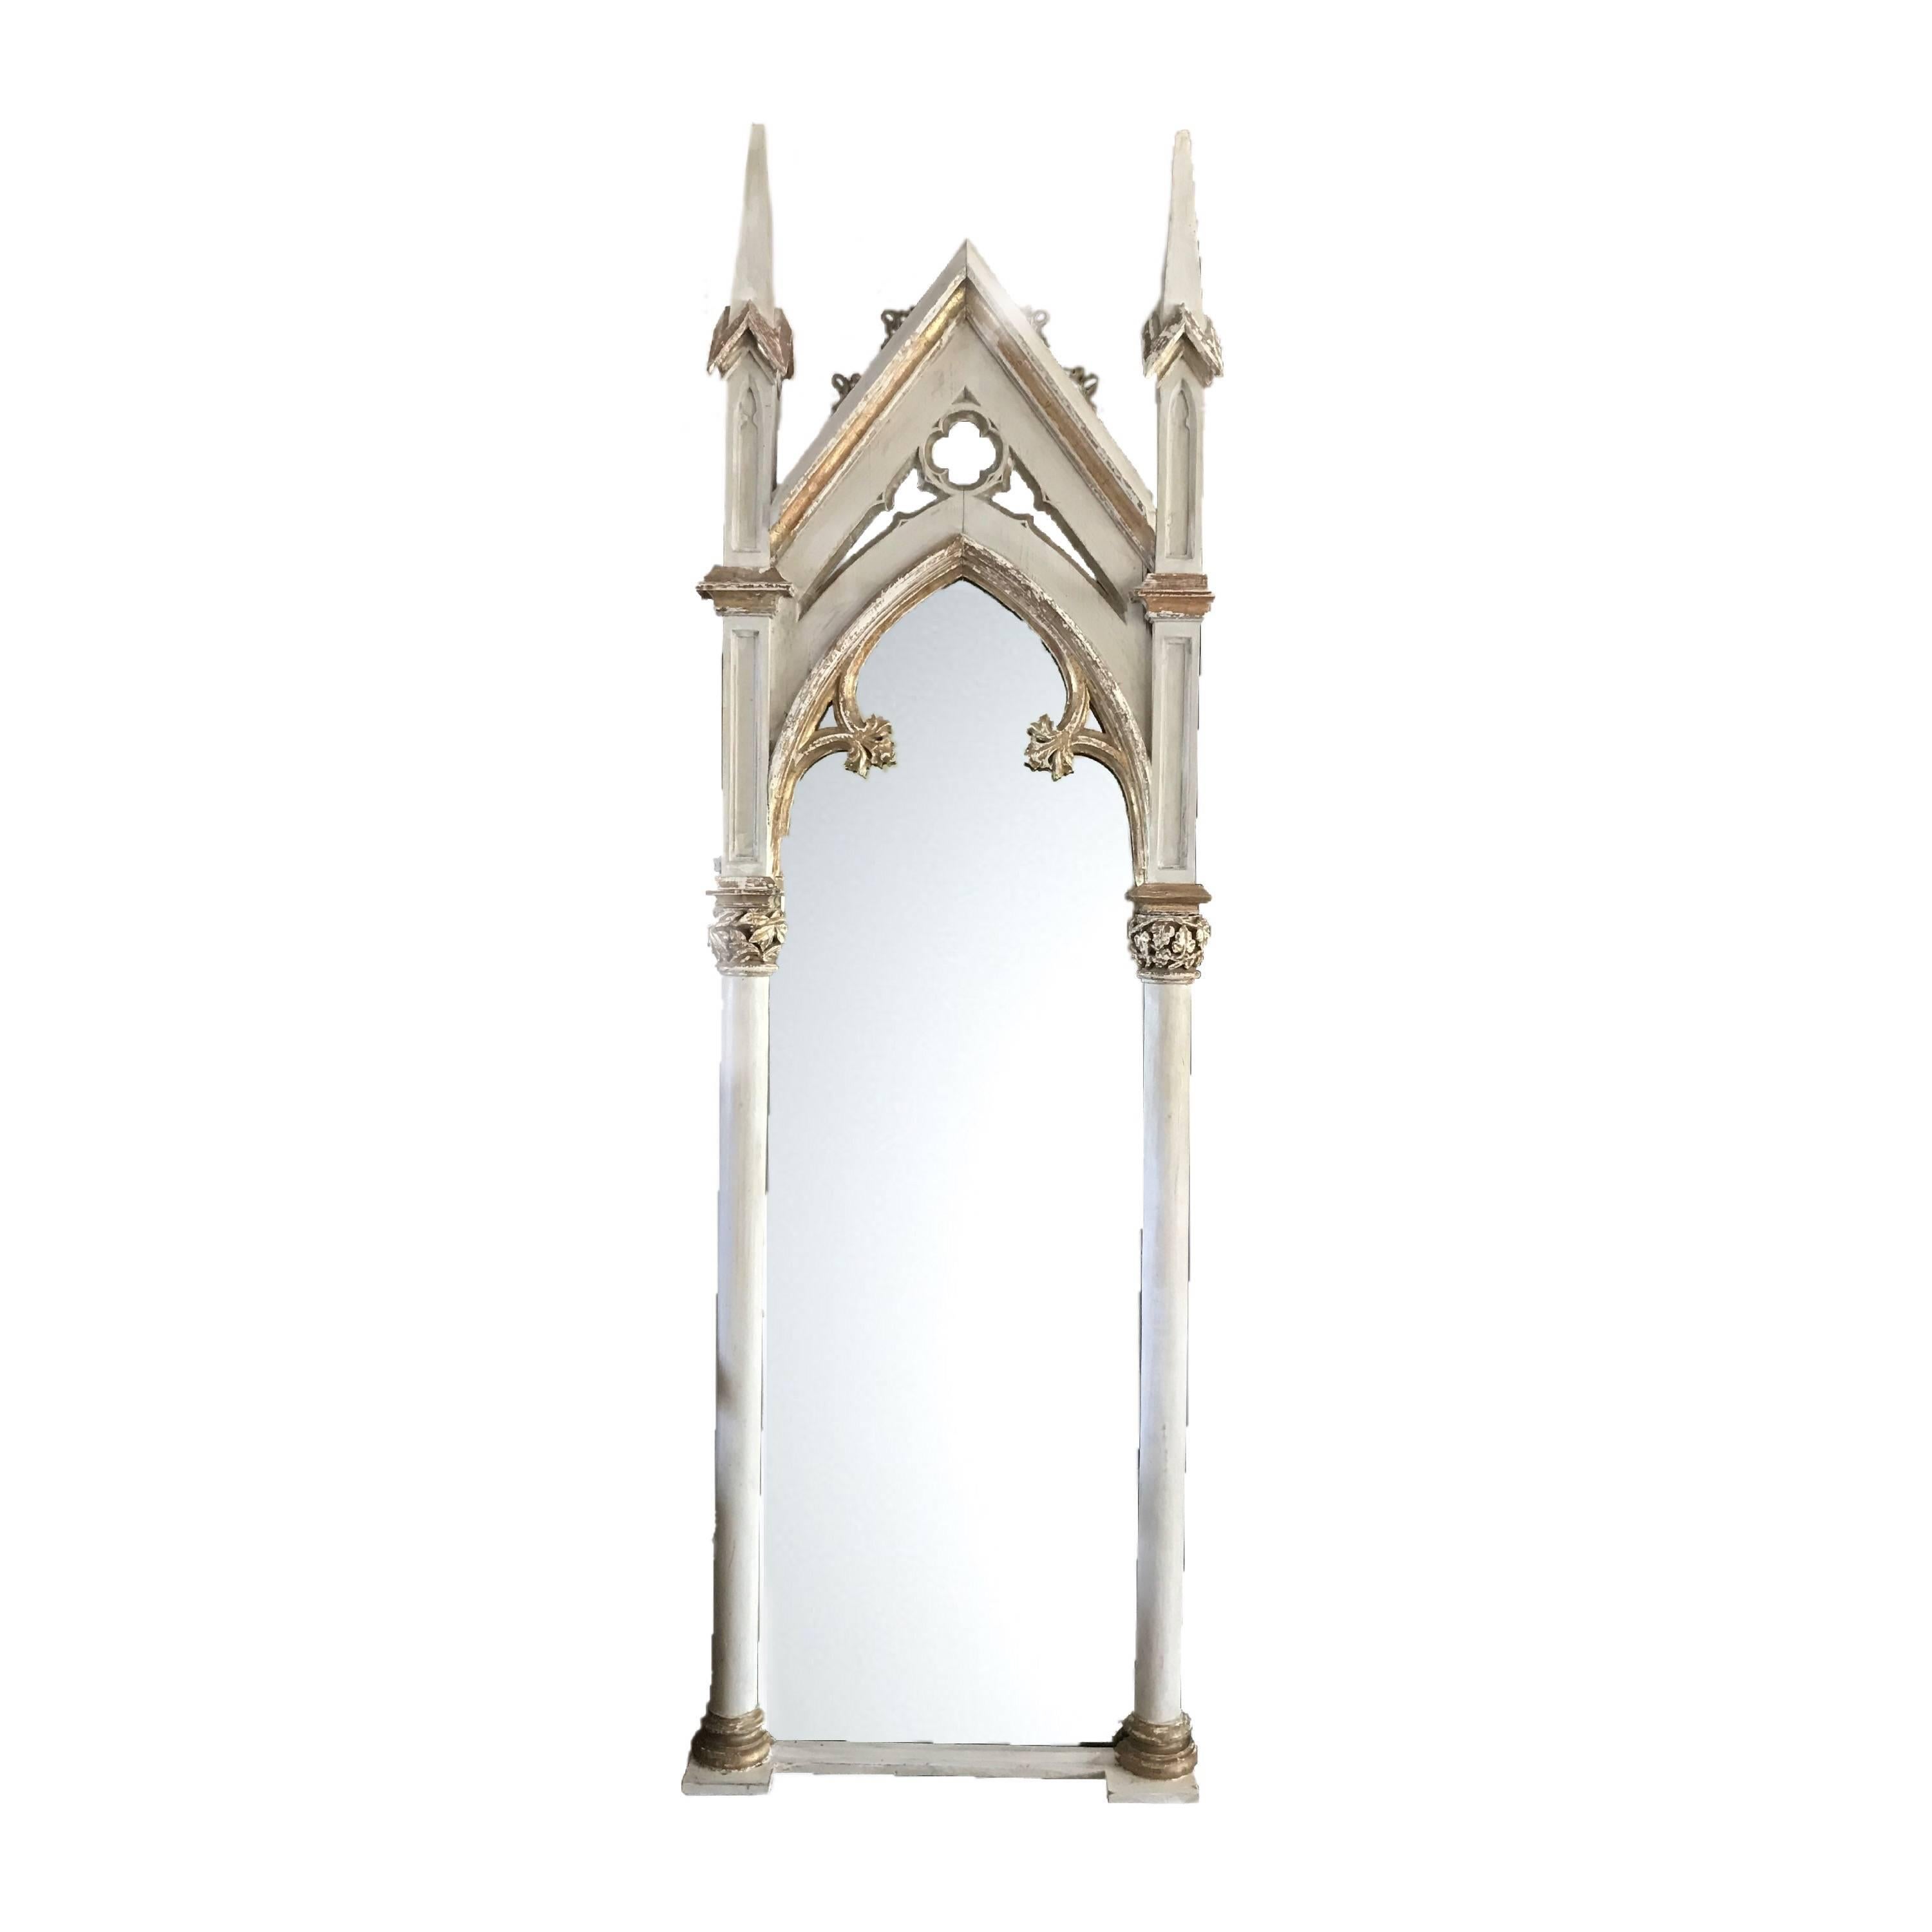 Huge Full Length Early Victorian Gothic Revival Mirror For Sale